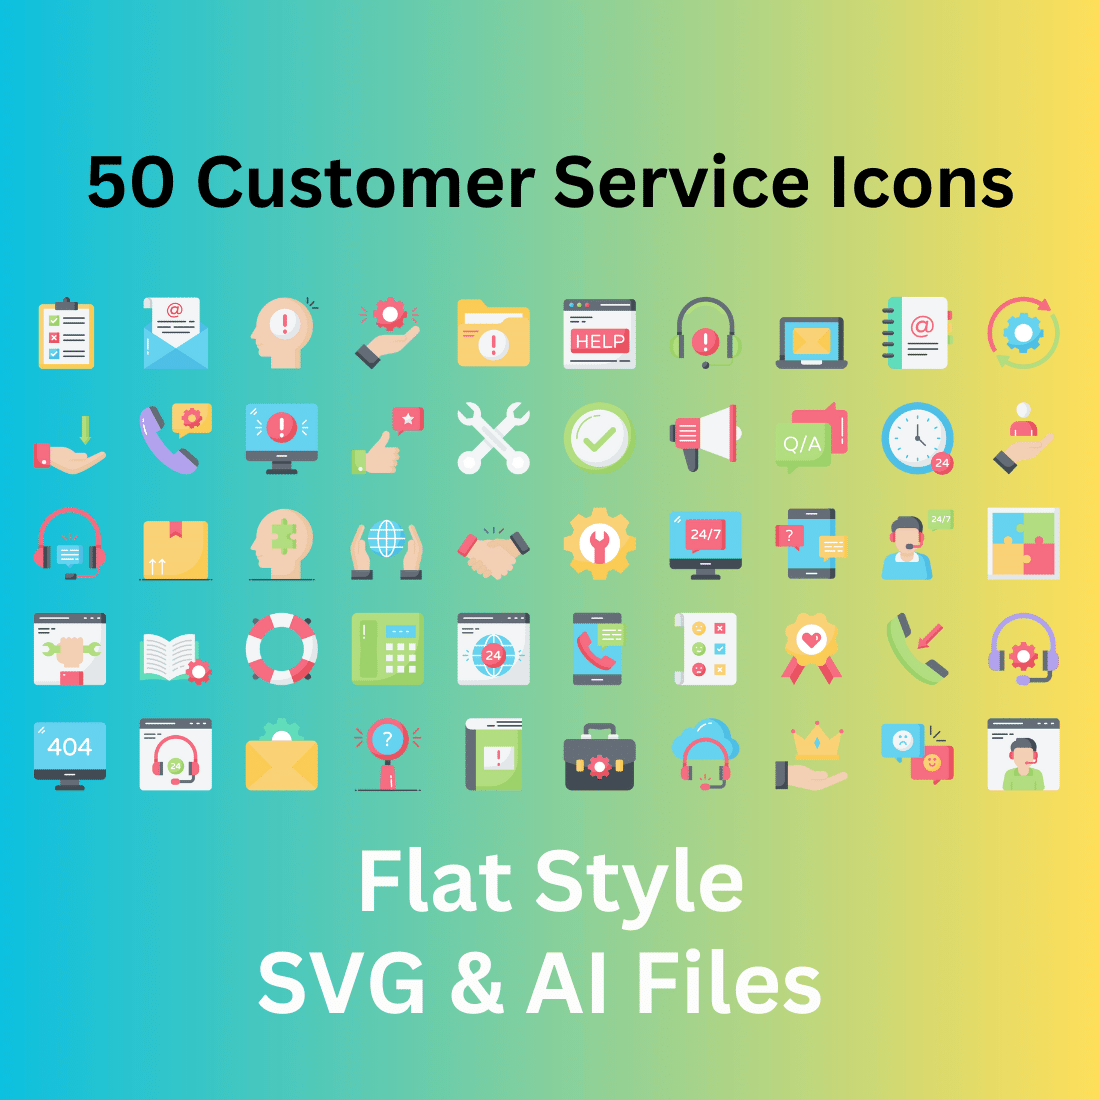 Customer Service Icon Set 50 Flat Icons - SVG And AI Files cover image.